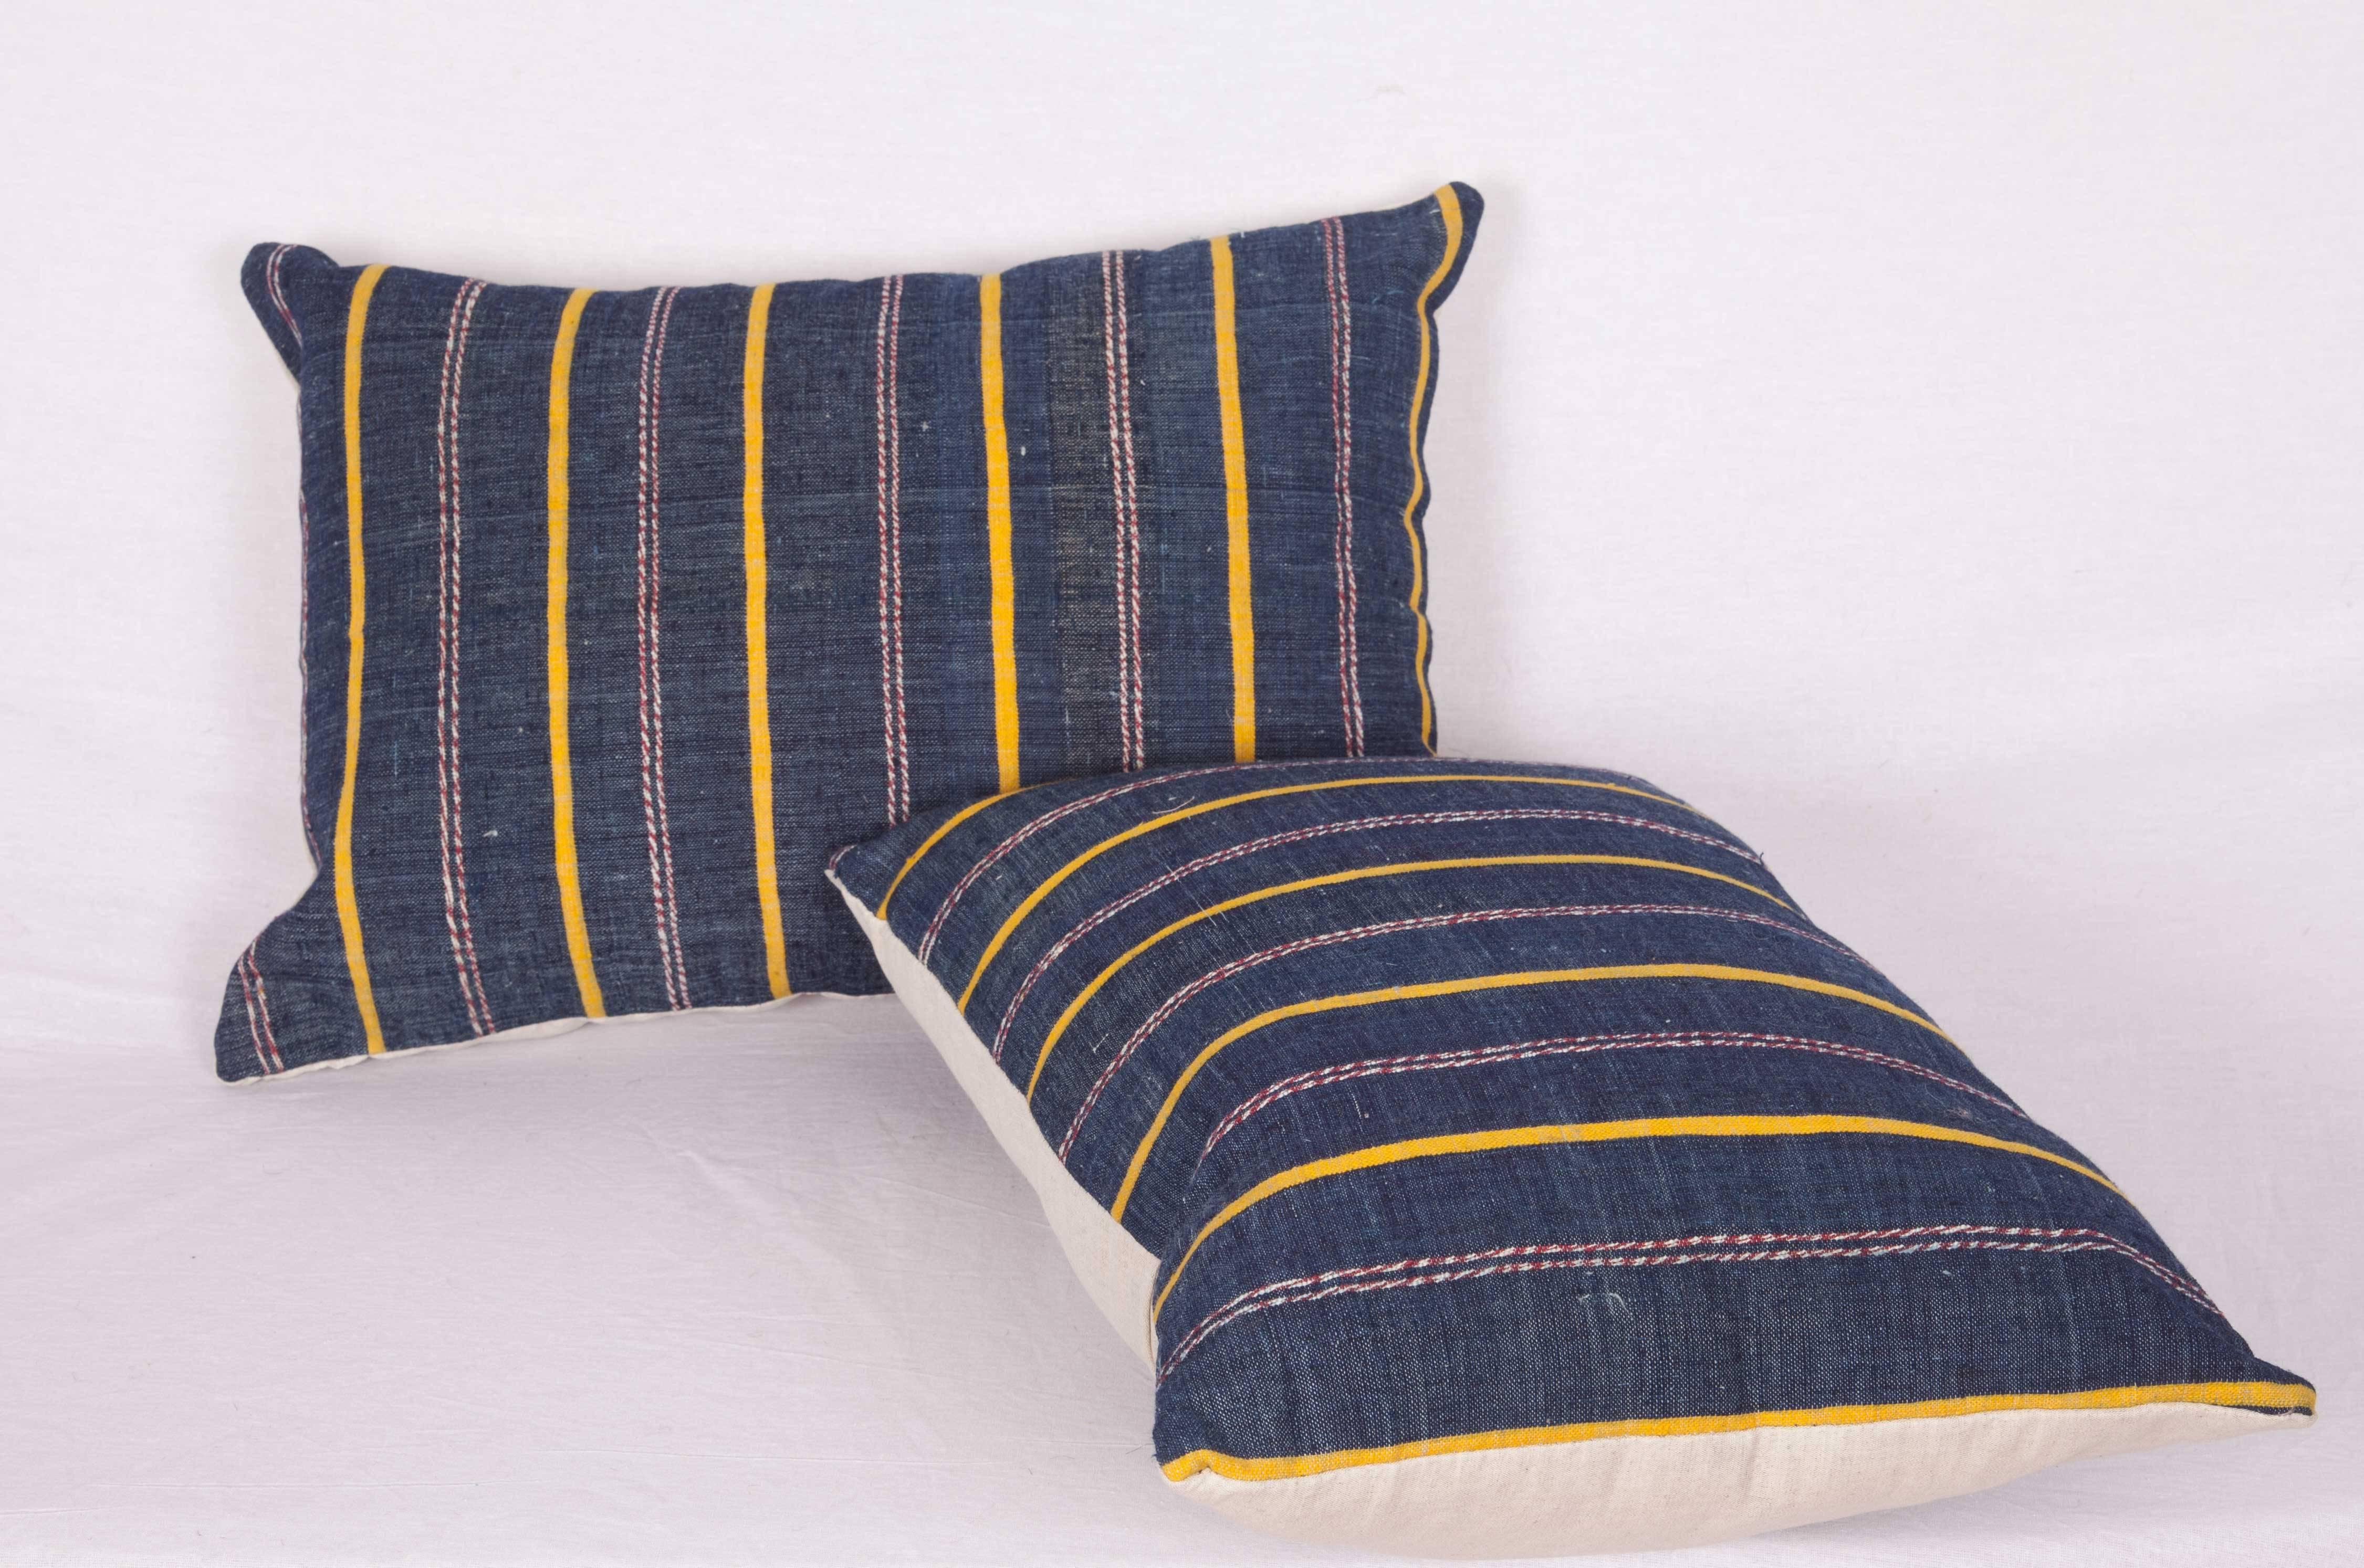 Turkish Pillow Cases Fashioned Out of an Mid-20th Century Anatolian Kilim For Sale